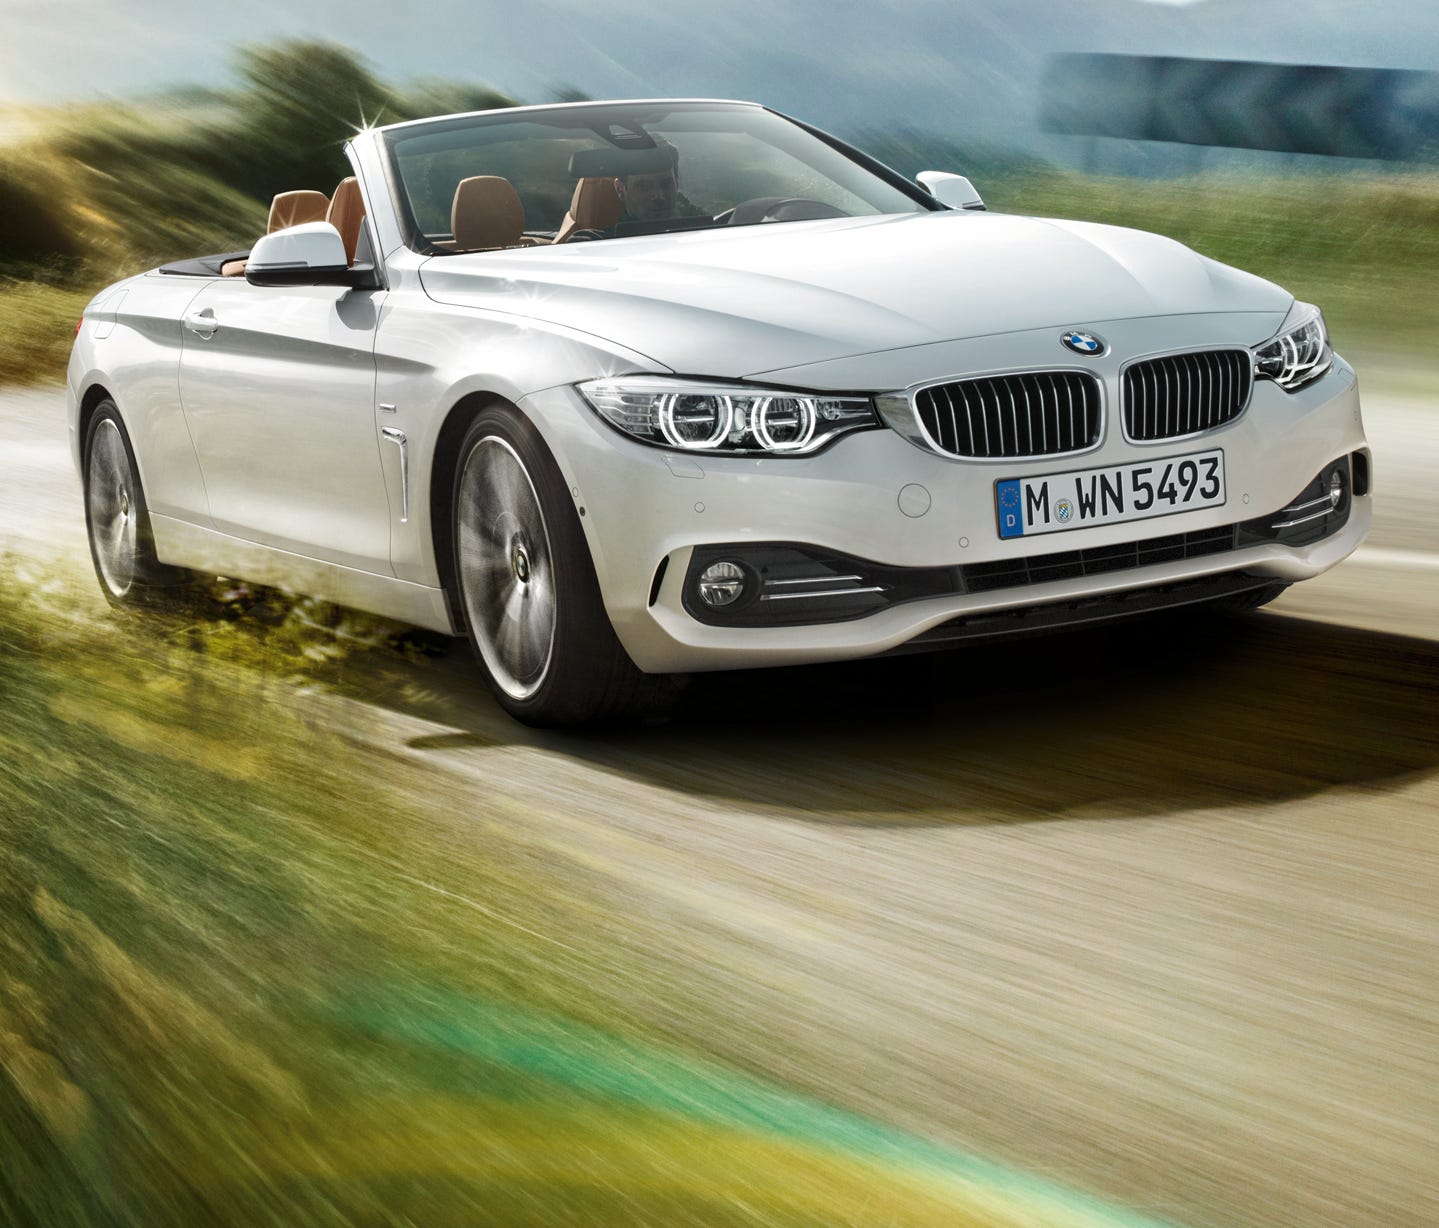 BMW 4 Series looks carefree as a convertible